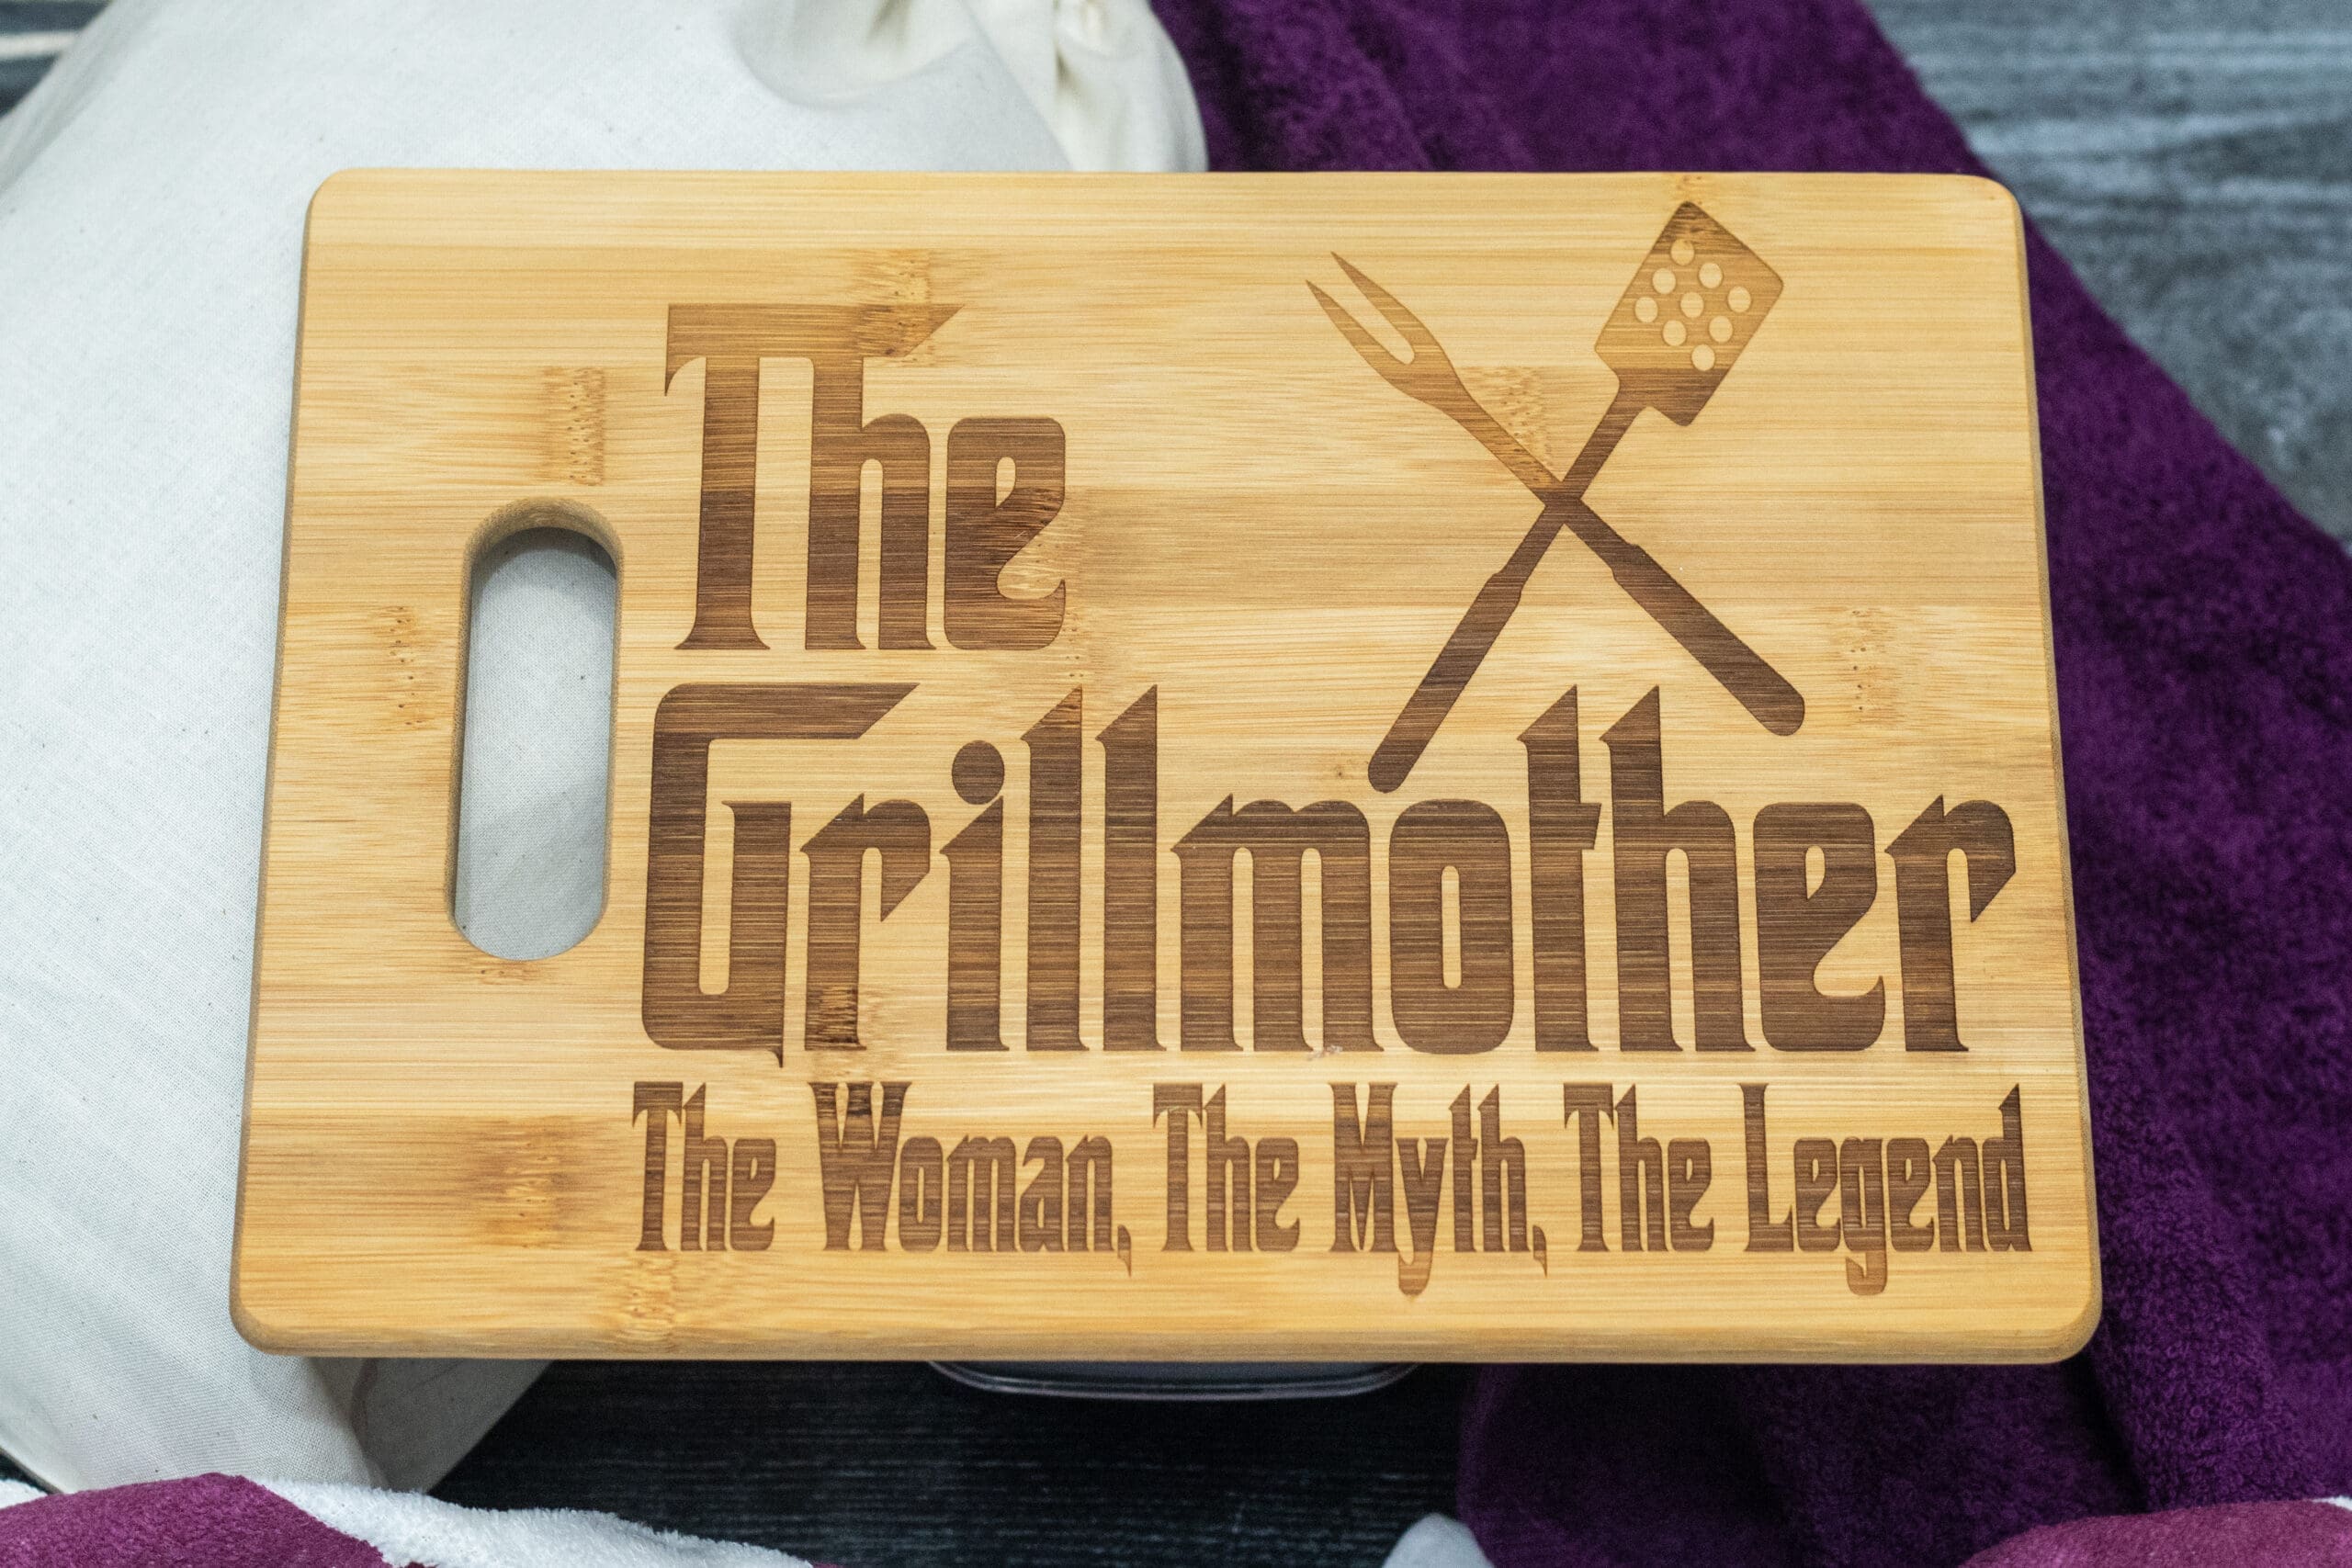 GrillMother Engraved Bamboo Cutting Board.